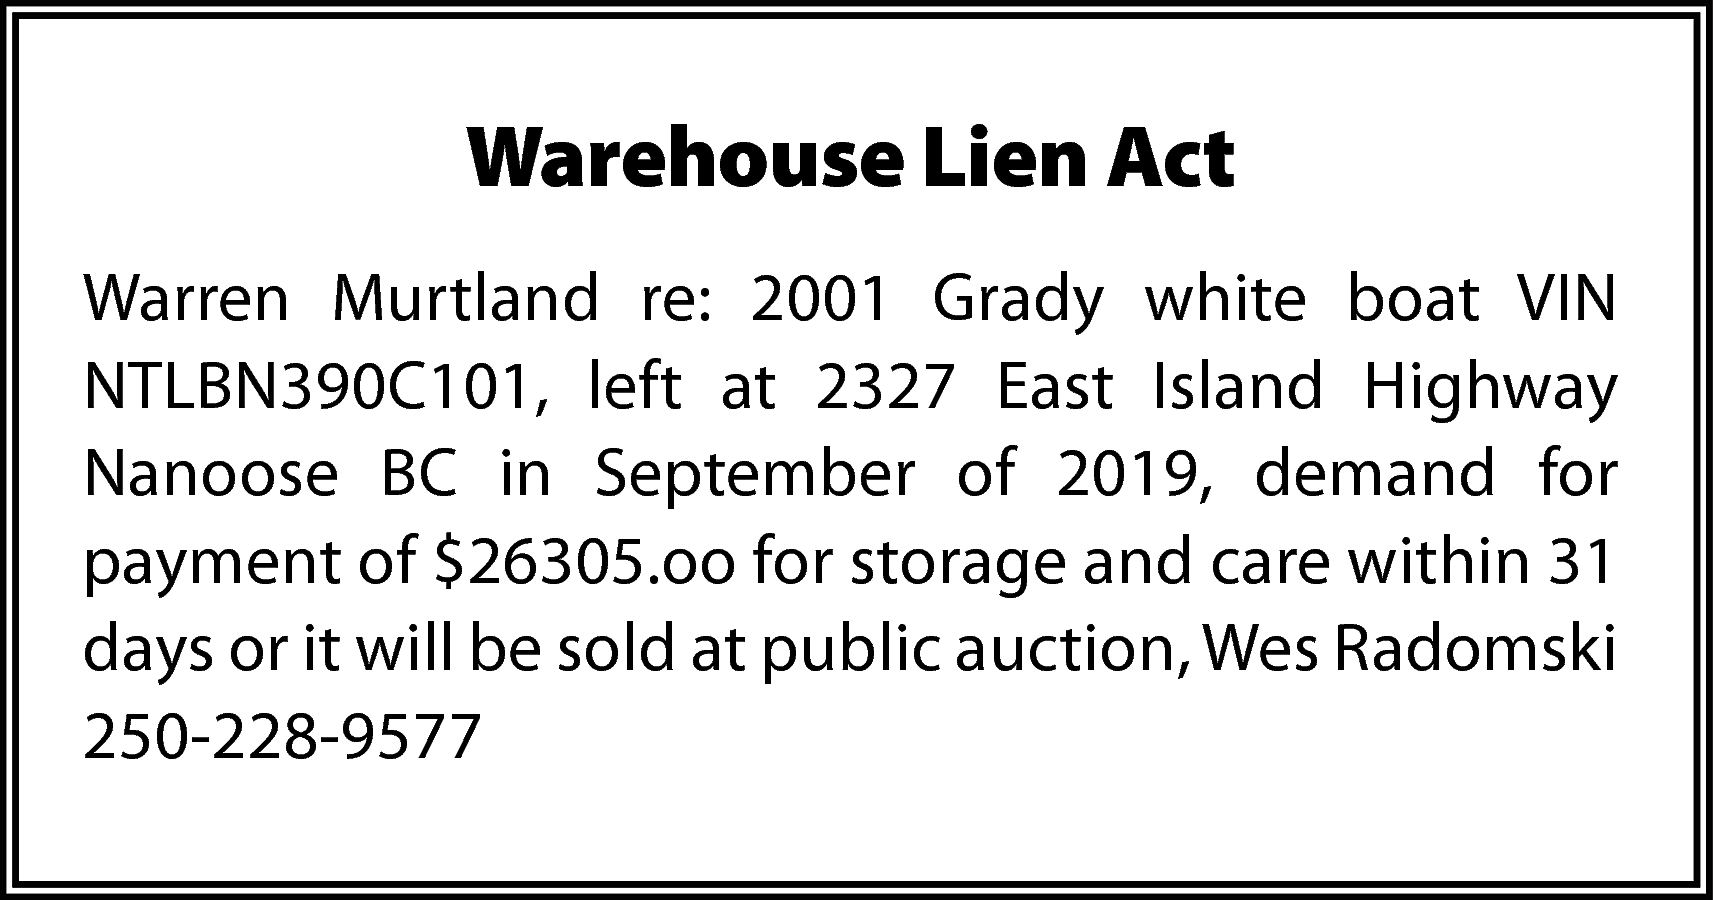 Warehouse Lien Act <br>Warren Murtland  Warehouse Lien Act  Warren Murtland re: 2001 Grady white boat VIN  NTLBN390C101, left at 2327 East Island Highway  Nanoose BC in September of 2019, demand for  payment of $26305.oo for storage and care within 31  days or it will be sold at public auction, Wes Radomski  250-228-9577    